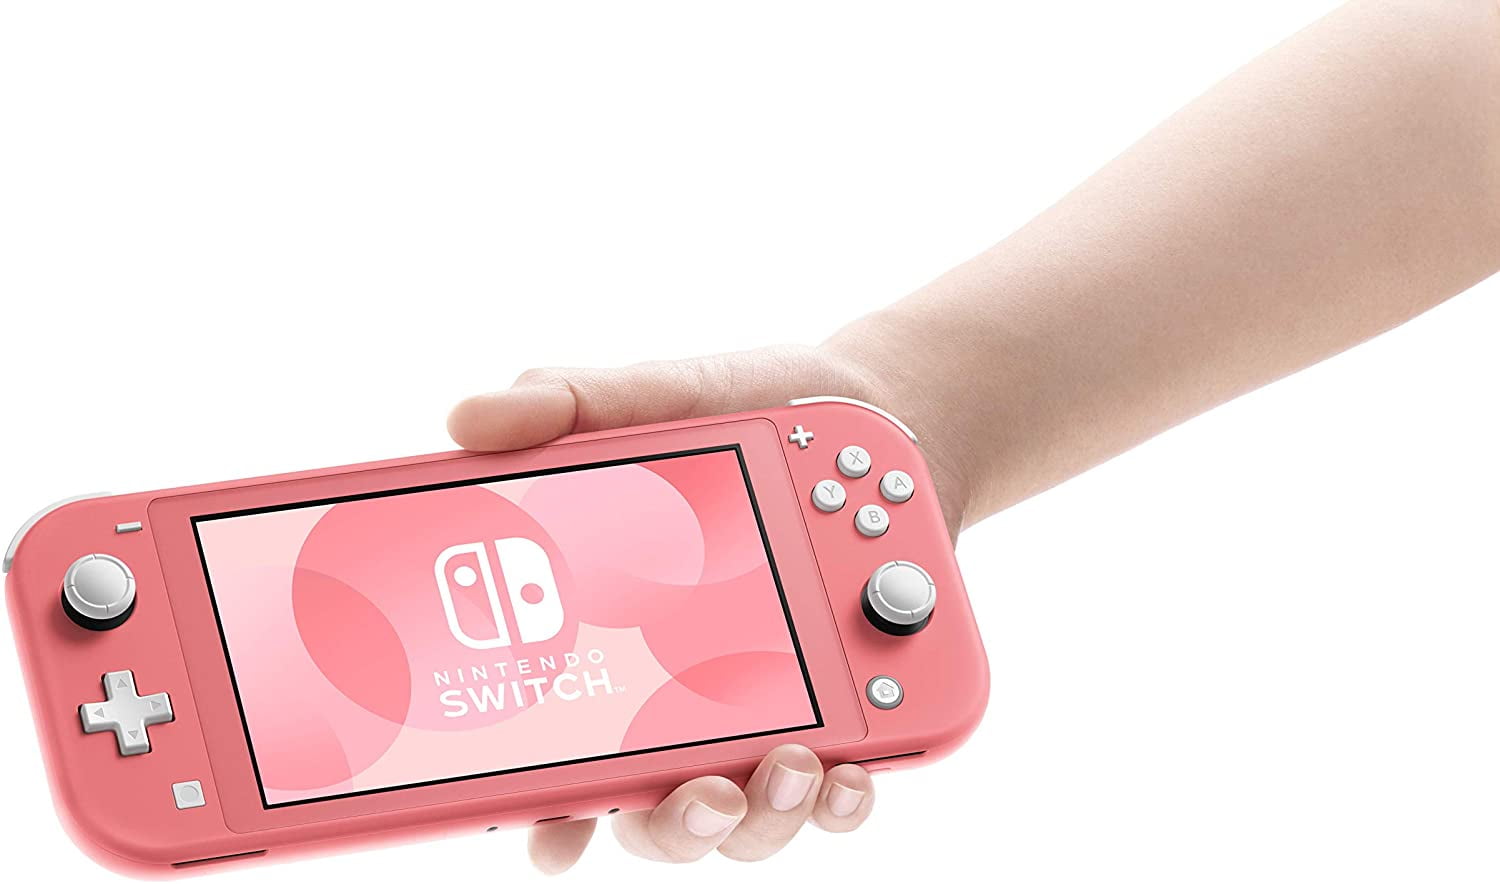 Nintendo Switch Lite in Coral with Accessory Kit - Walmart.com